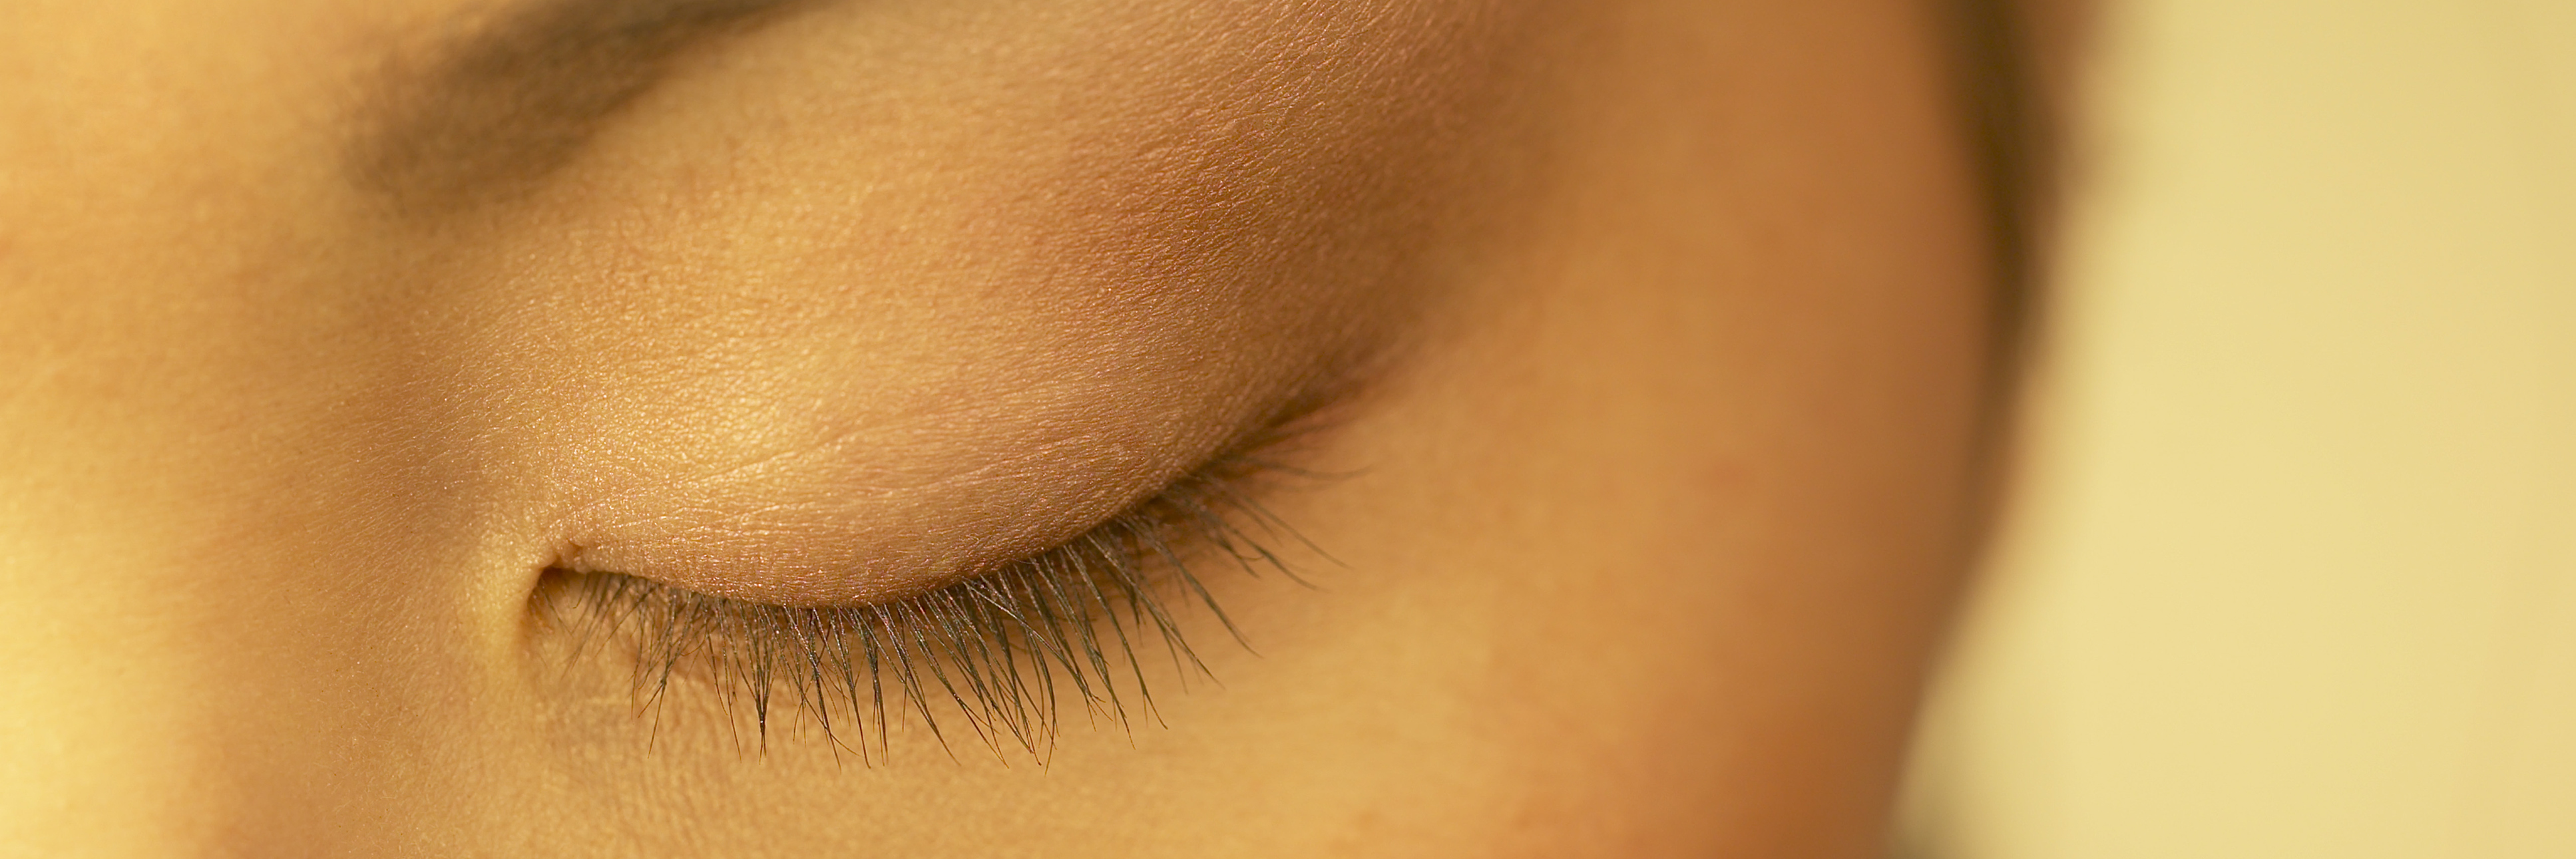 close up of woman's closed eye